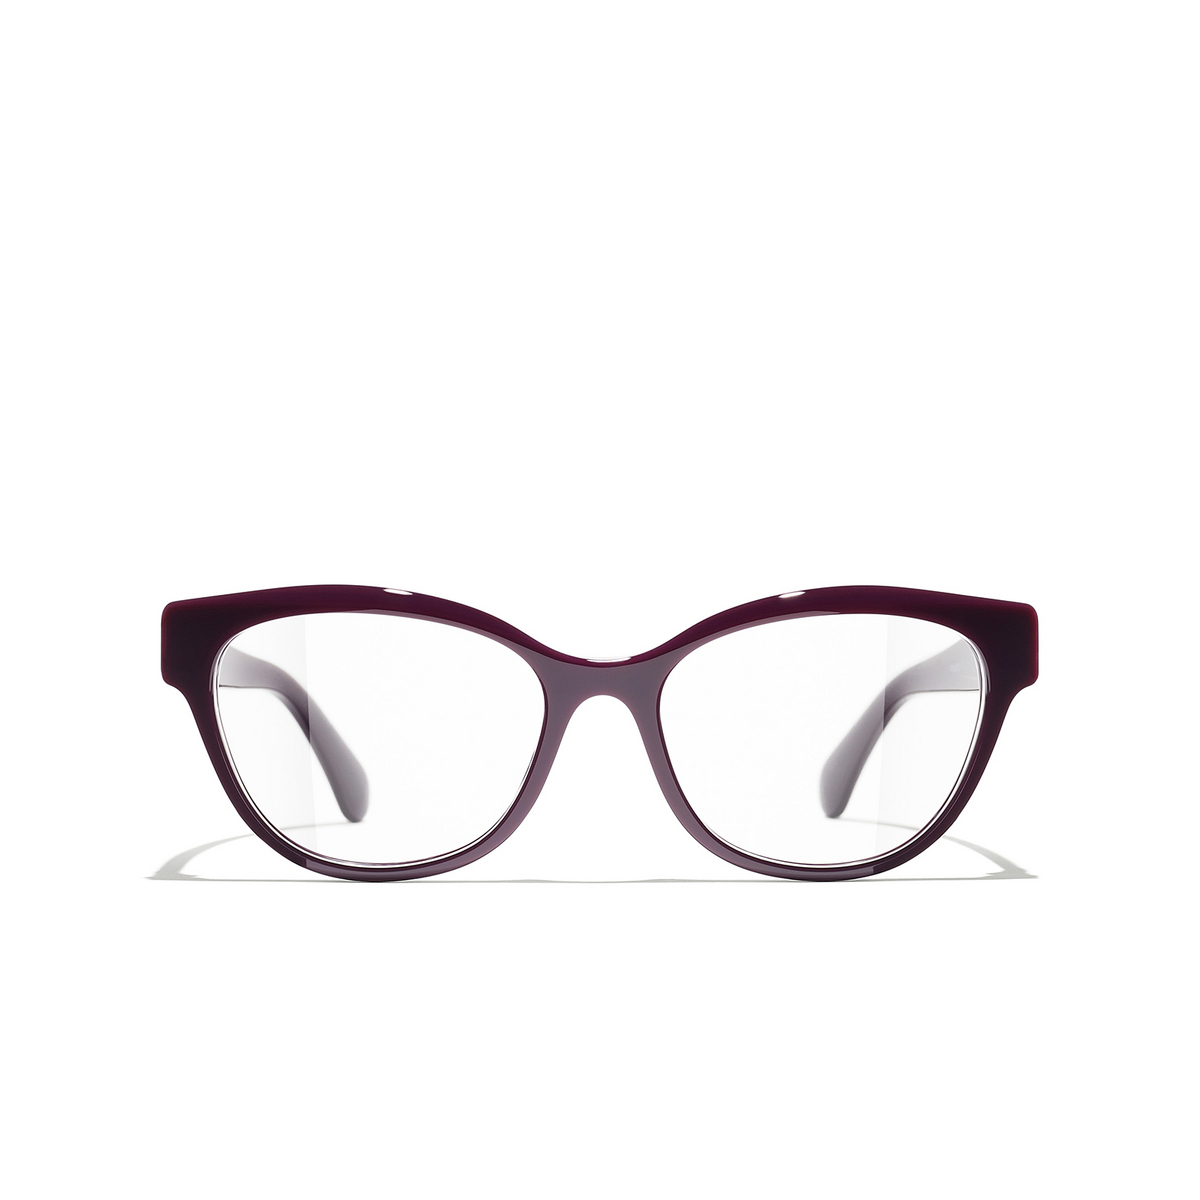 CHANEL square Eyeglasses 1068 Burgundy - front view